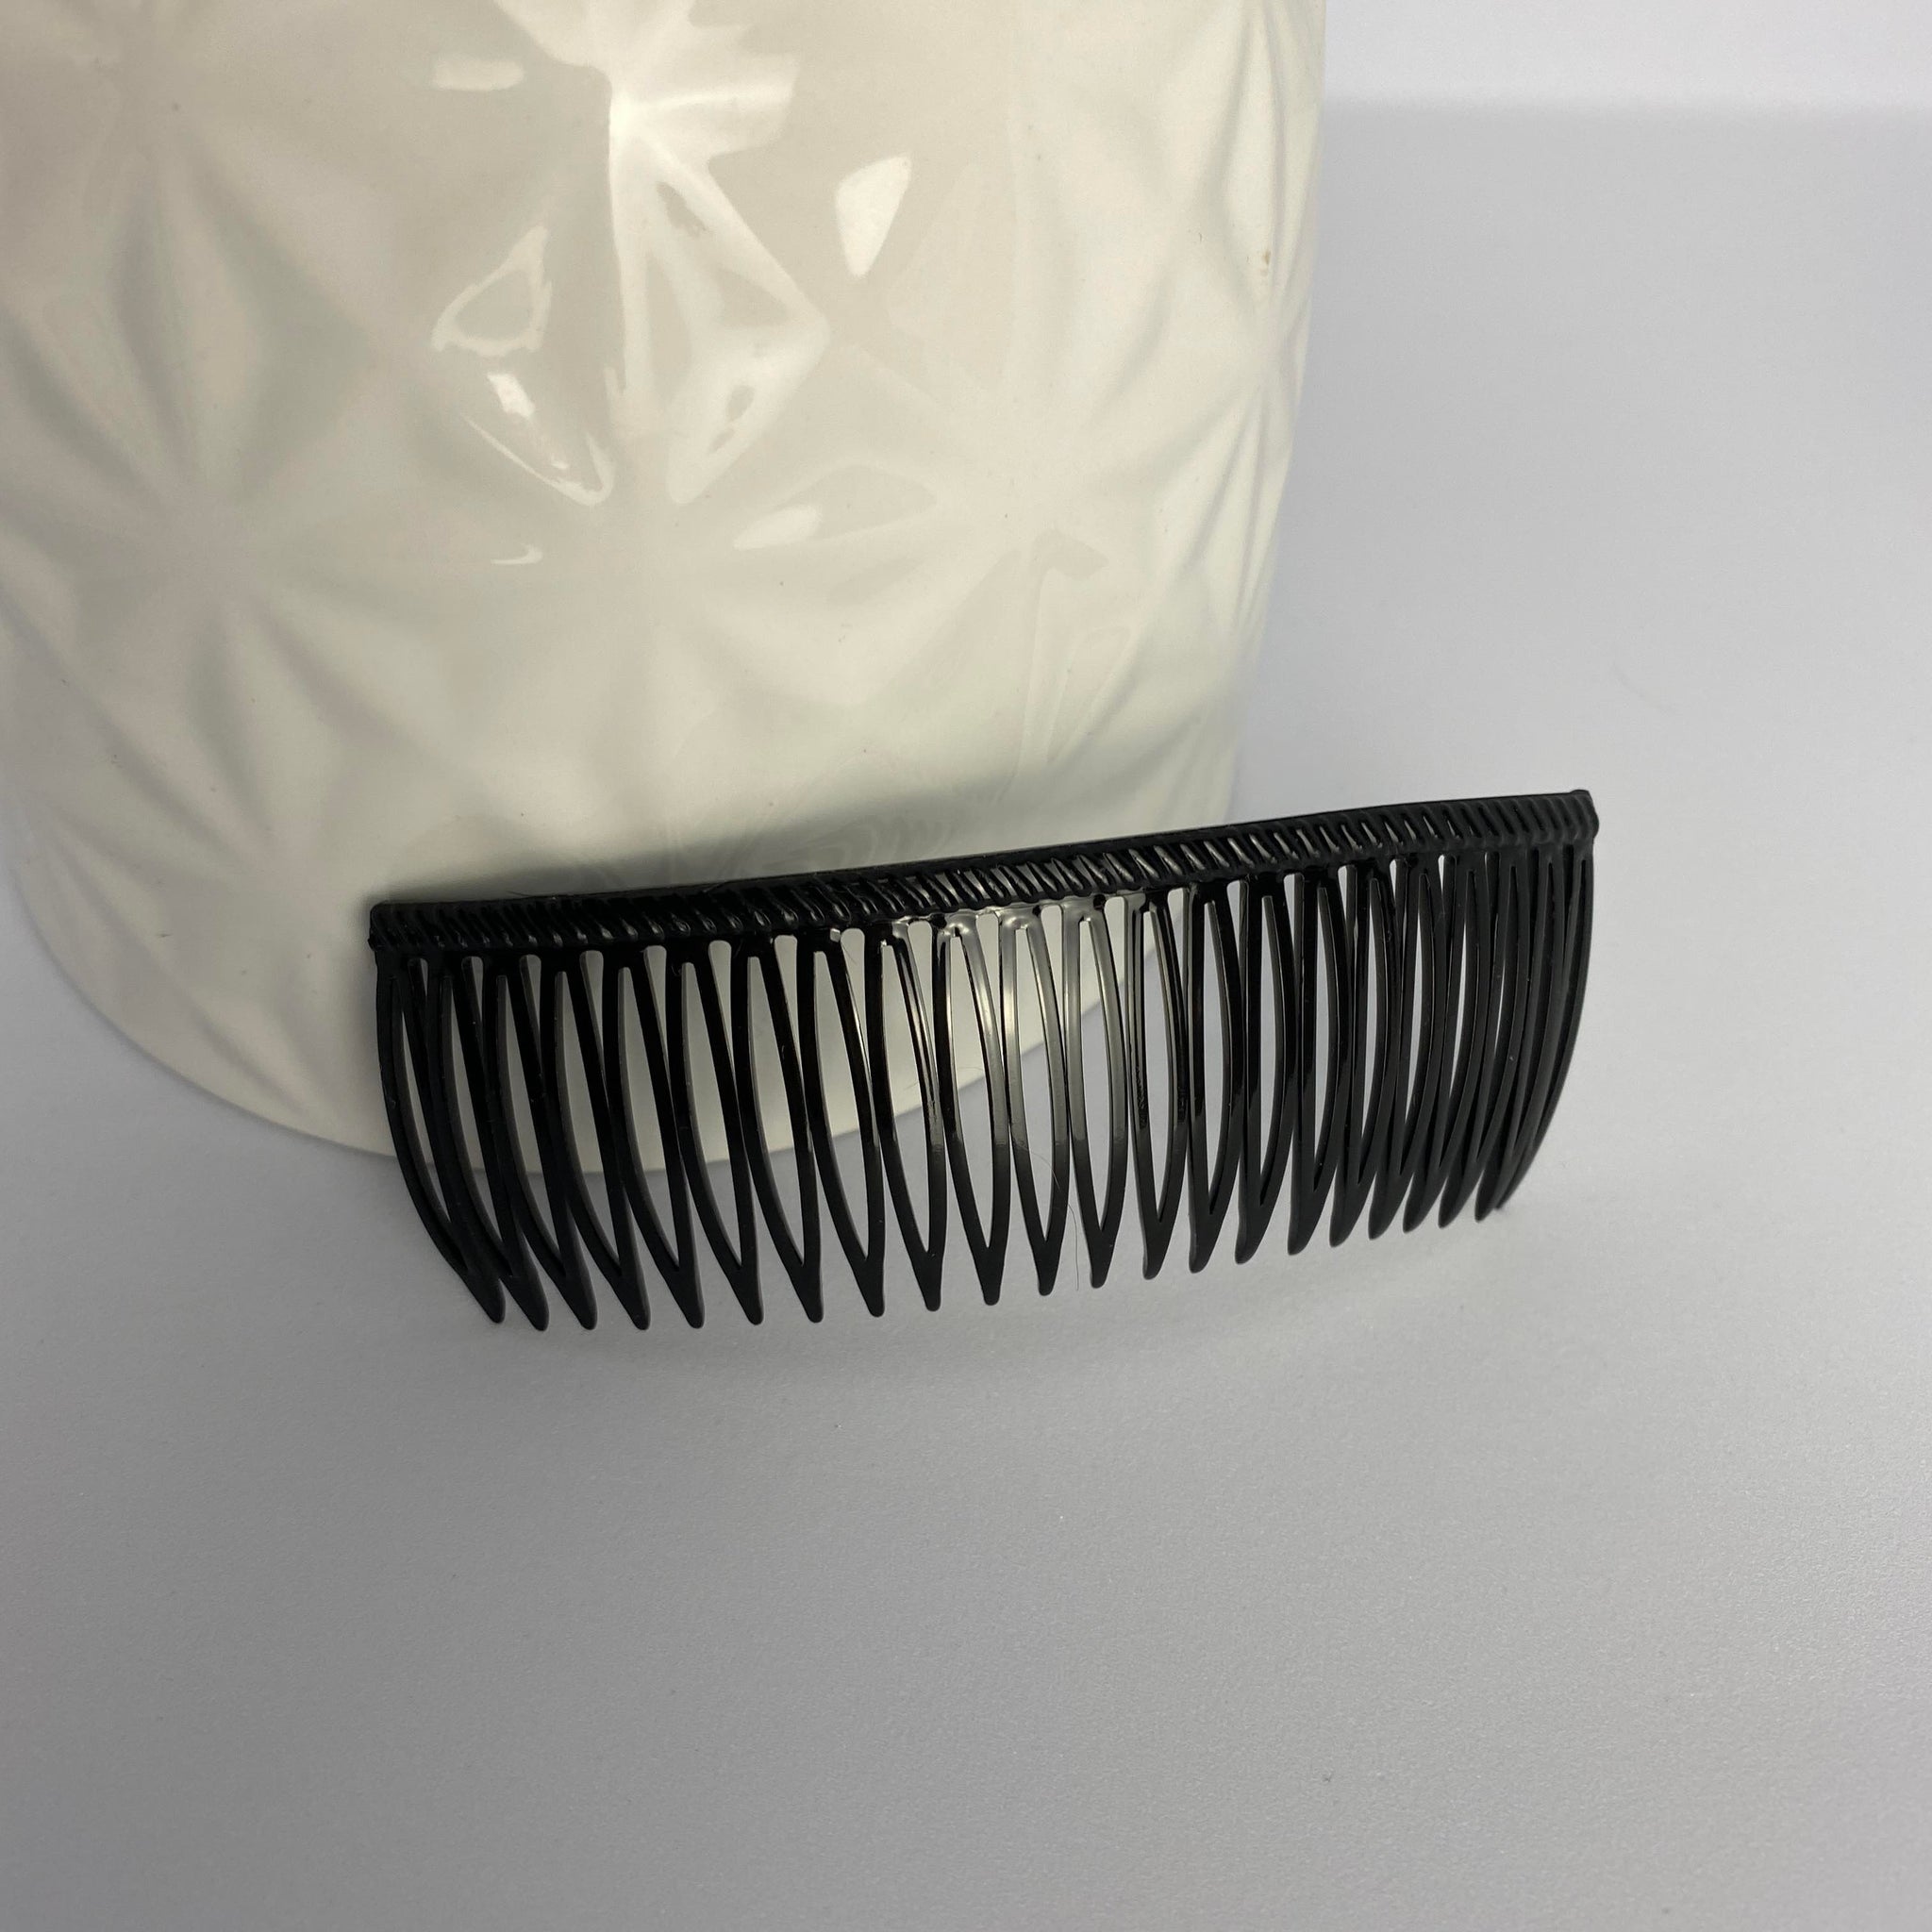 grip tuth comb frenchy 4 inch size in black